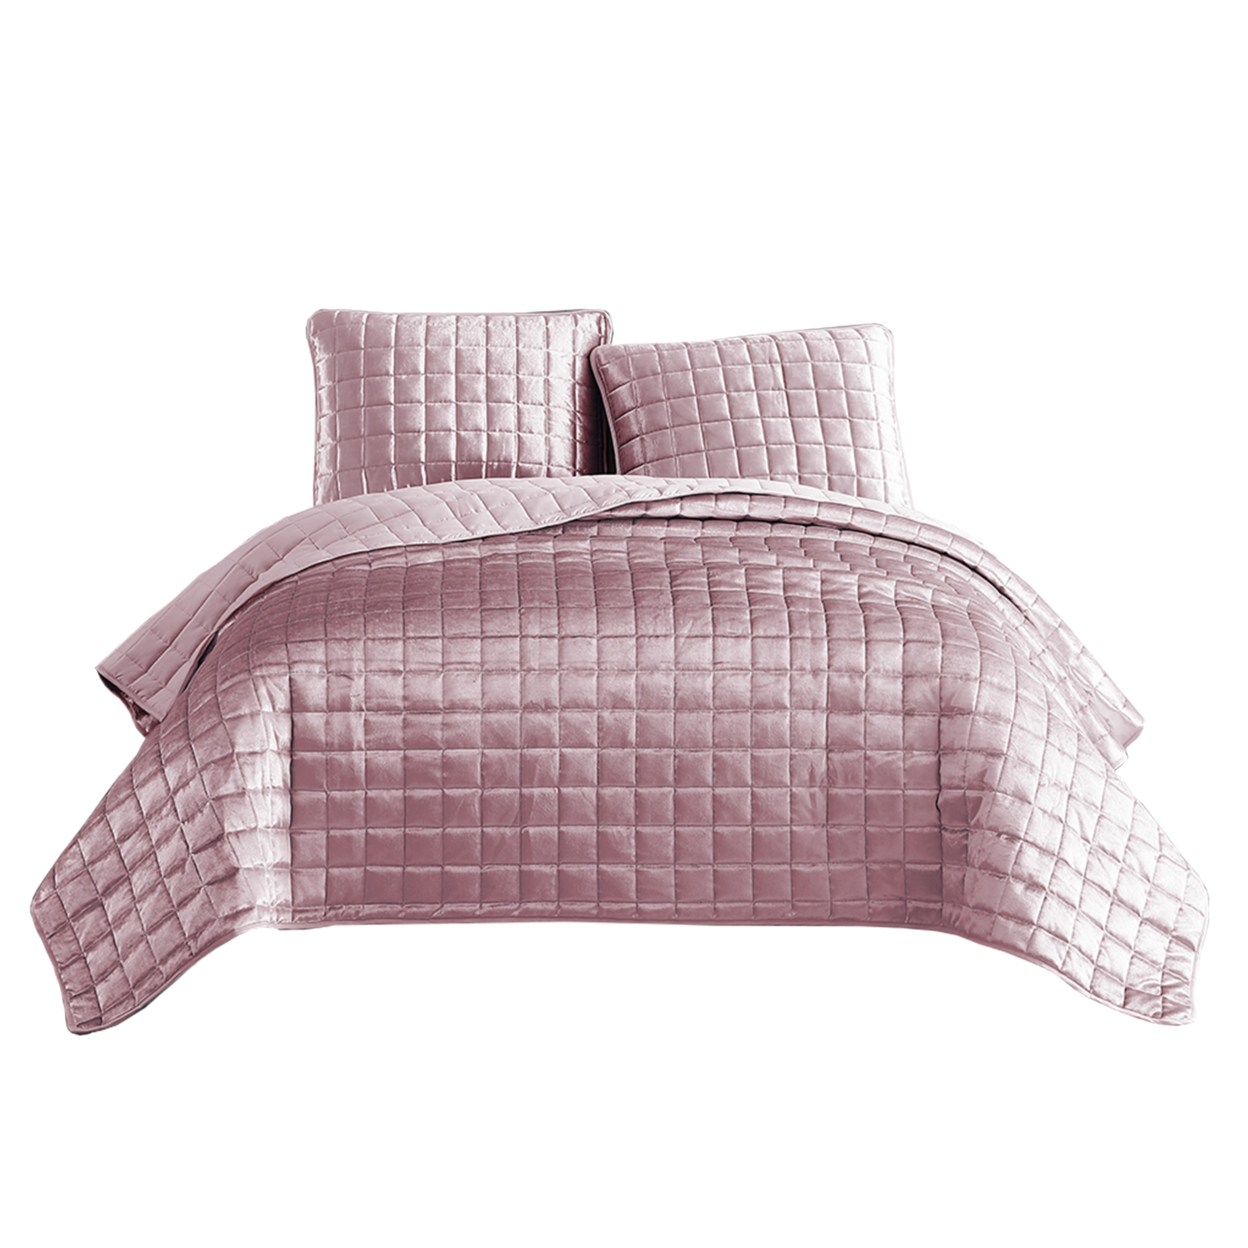 3 Piece Queen Size Coverlet Set With Stitched Square Pattern, Pink- Saltoro Sherpi